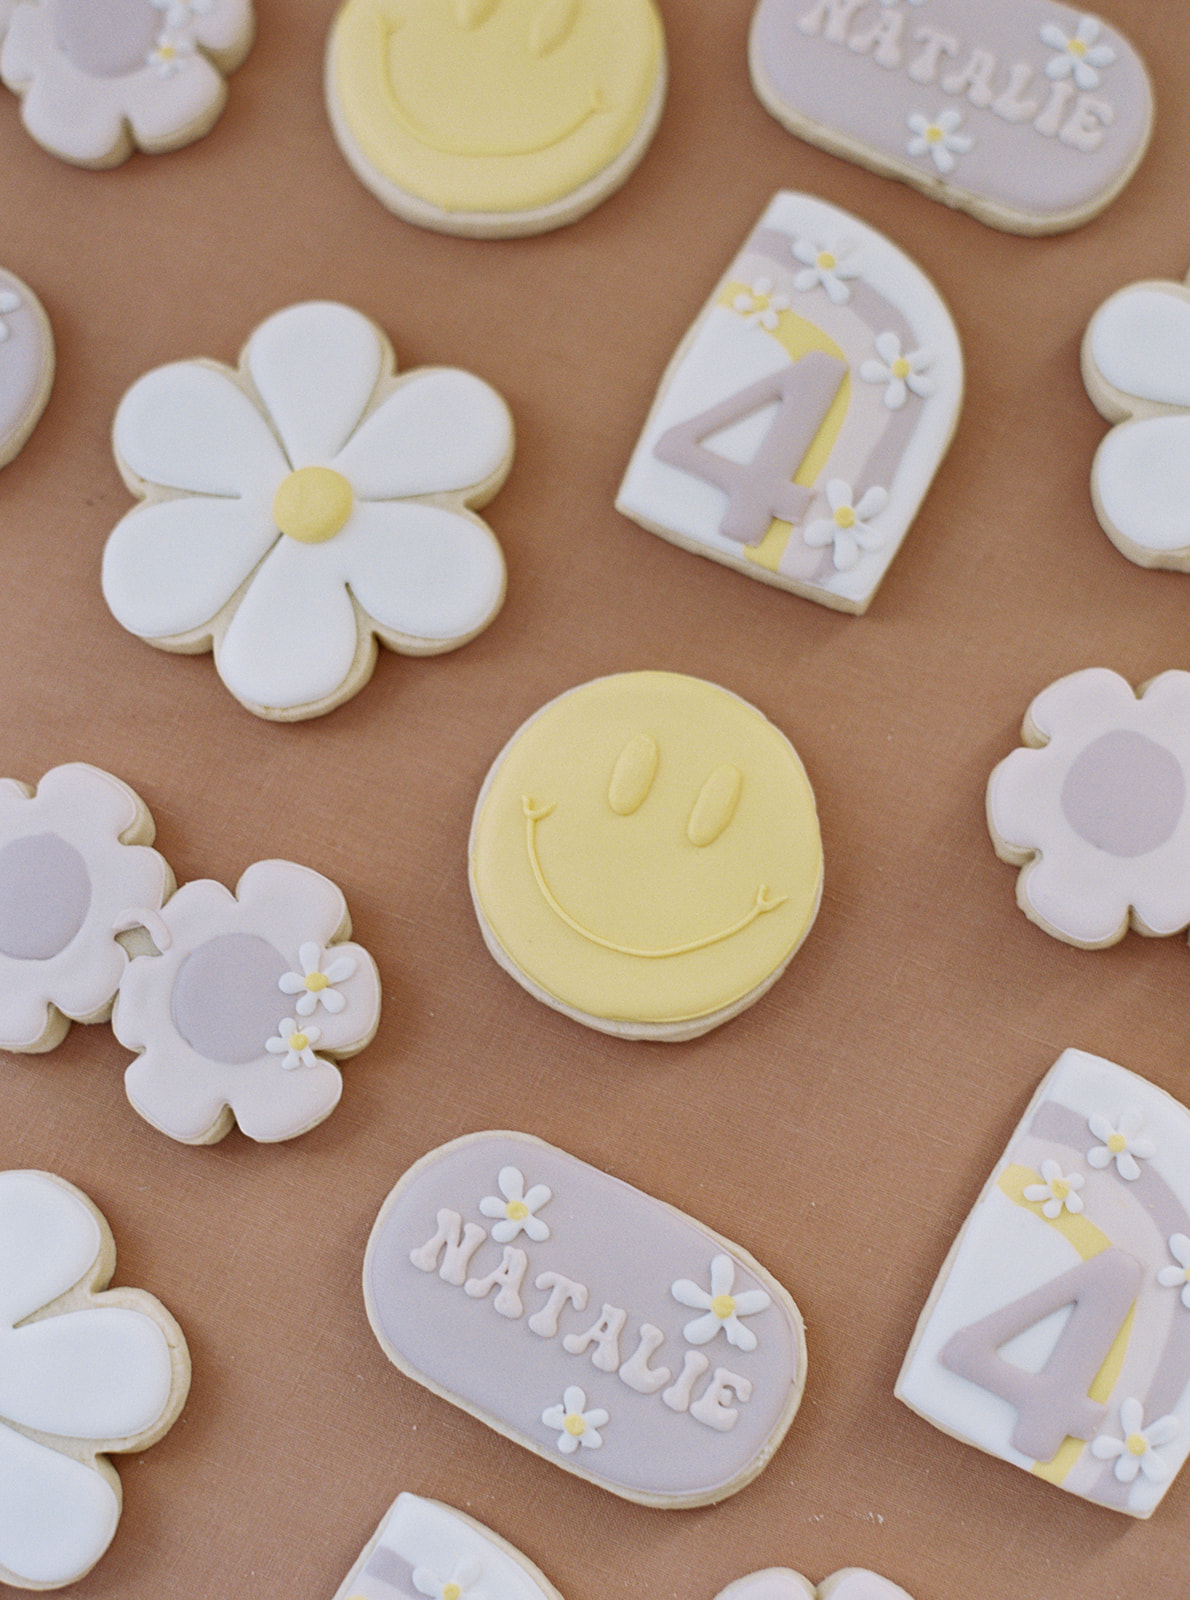 smiley face and daisy themed 4th birthday party cookies